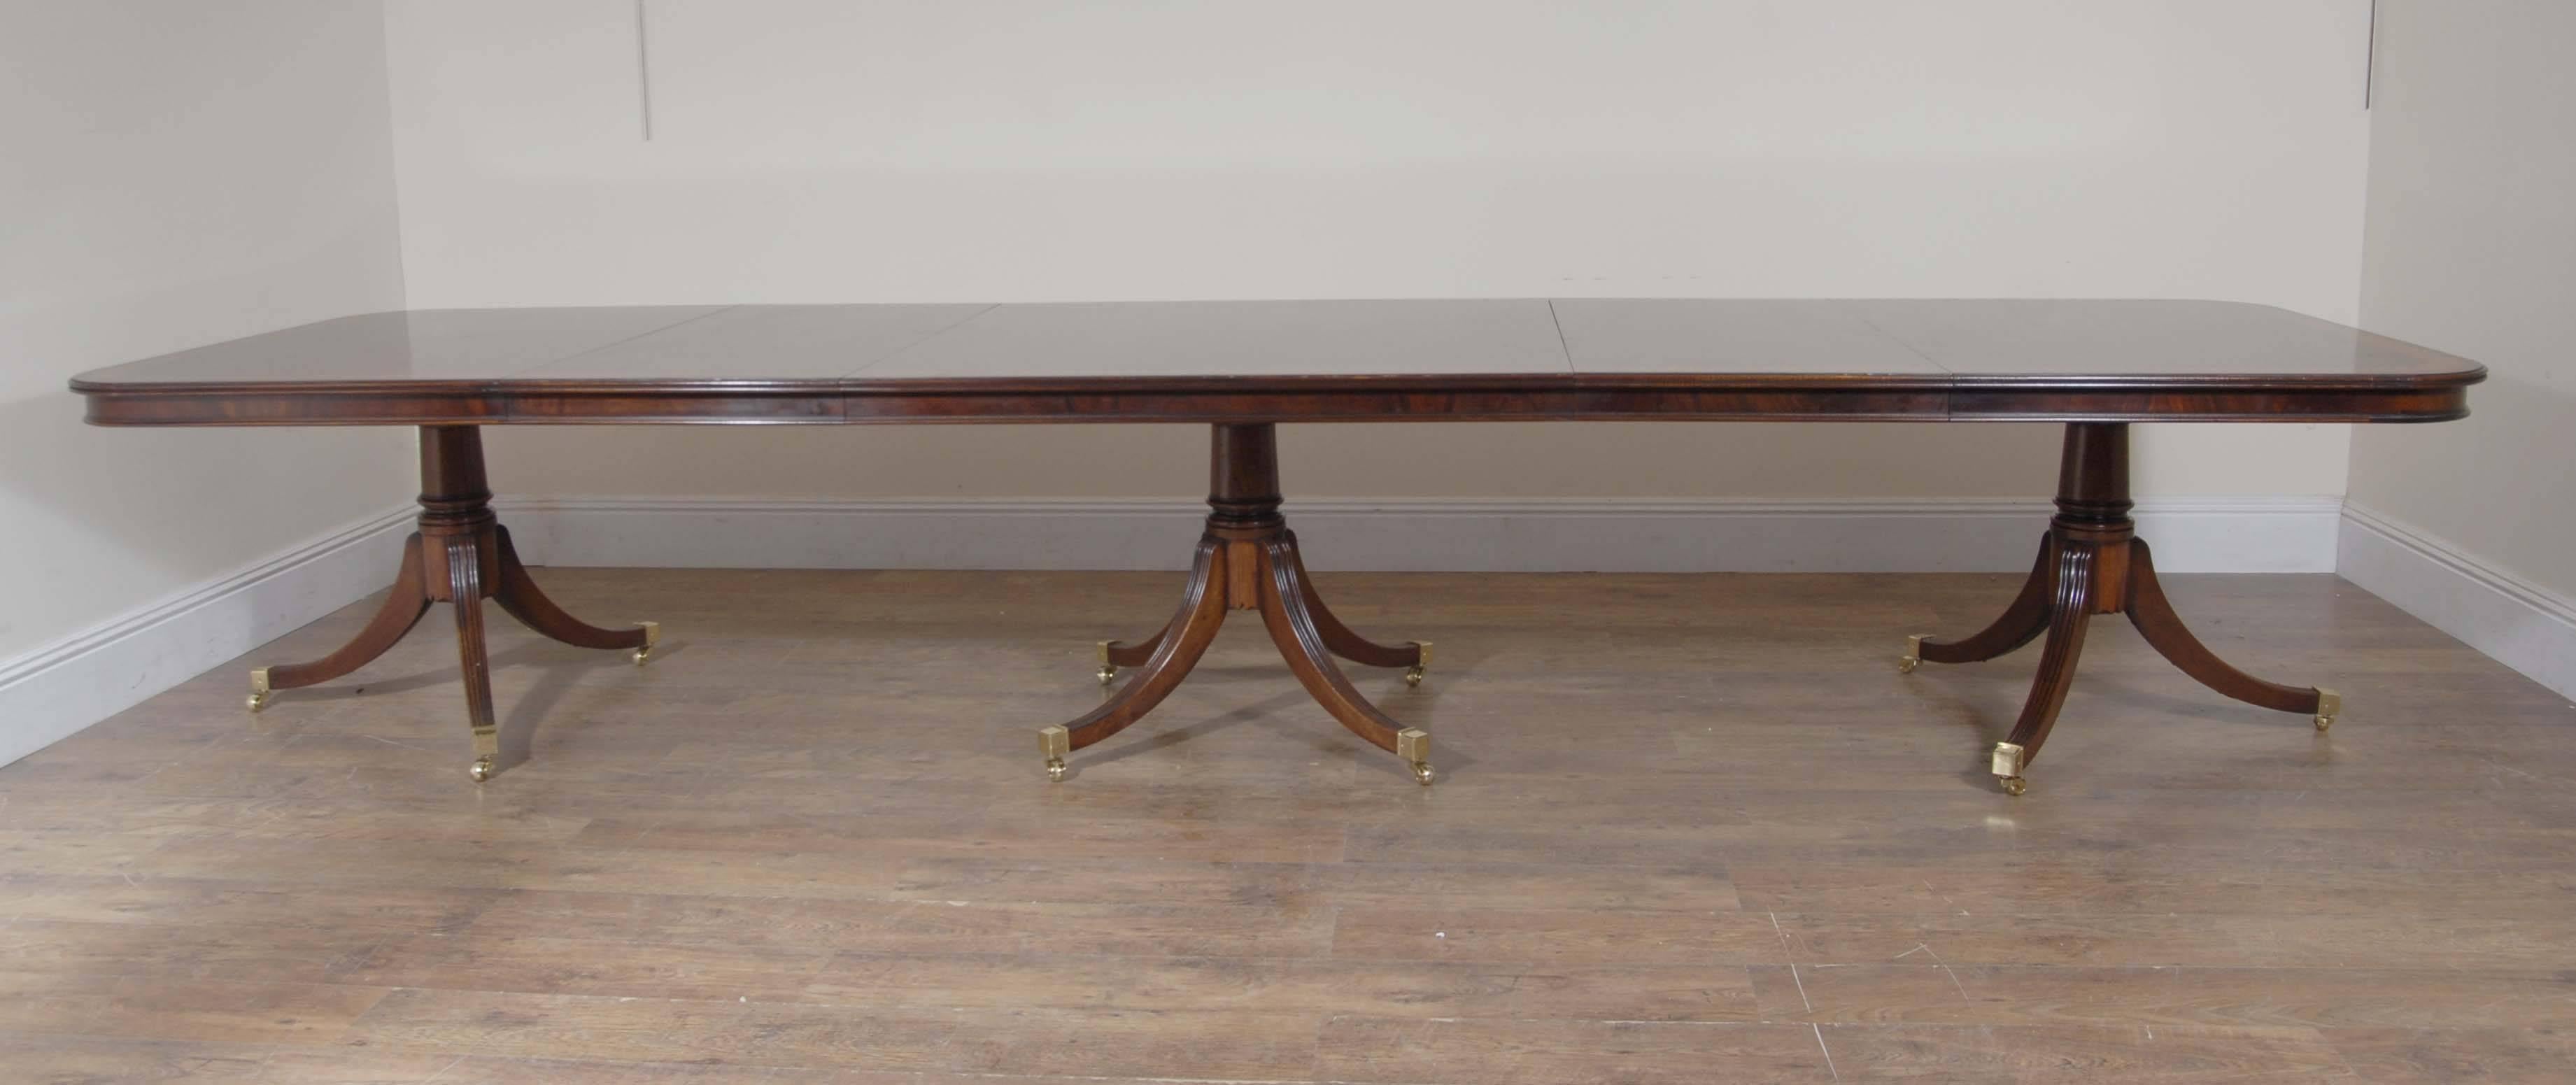 Viewings possible in our Hertfordshire warehouse - please contact.
Absolutely stunning triple pedestal Regency style dining table in mahogany.
Table measures 13.5 feet when fully extended - seats 10-12 people.
Table has three leaves and three